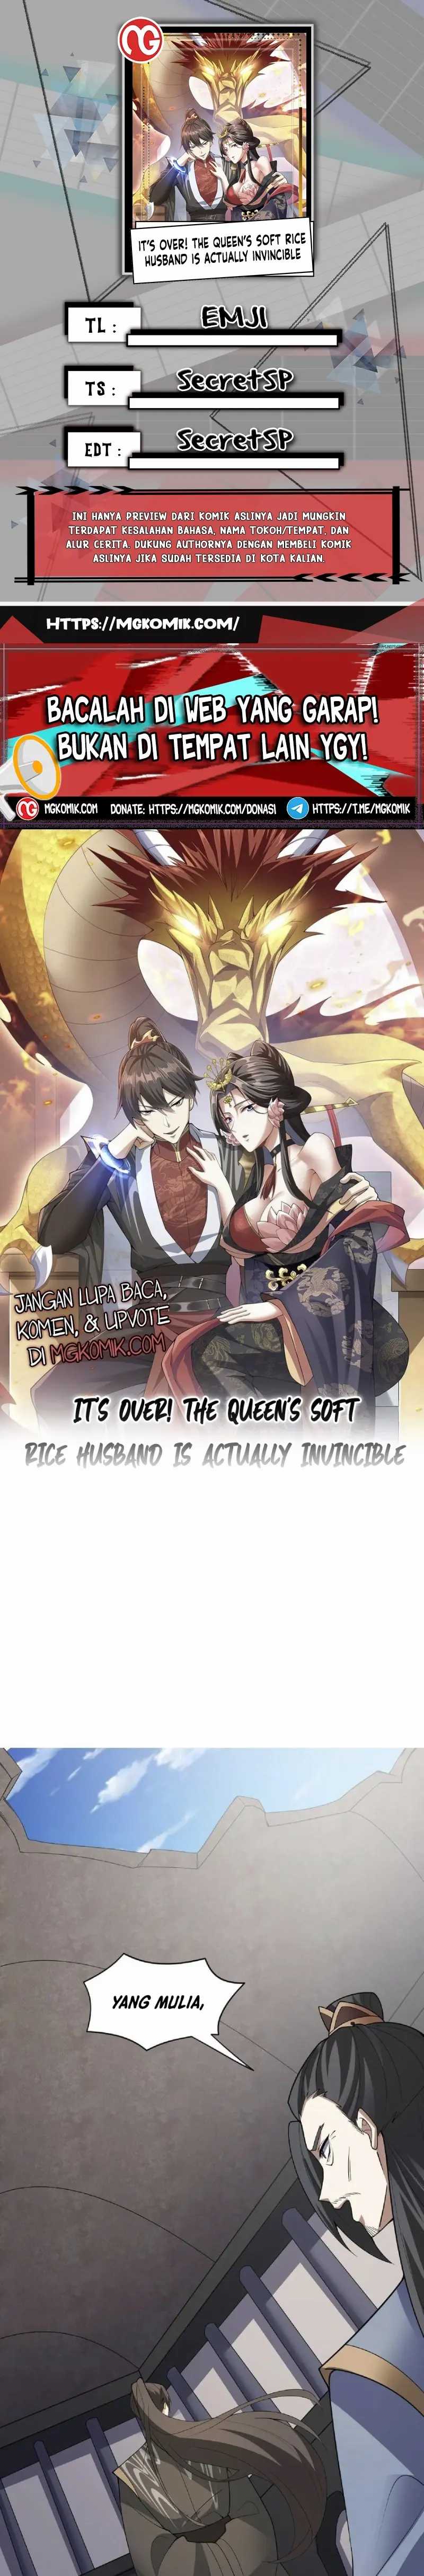 It’s Over! The Queen’s Soft Rice Husband is Actually Invincible Chapter 57